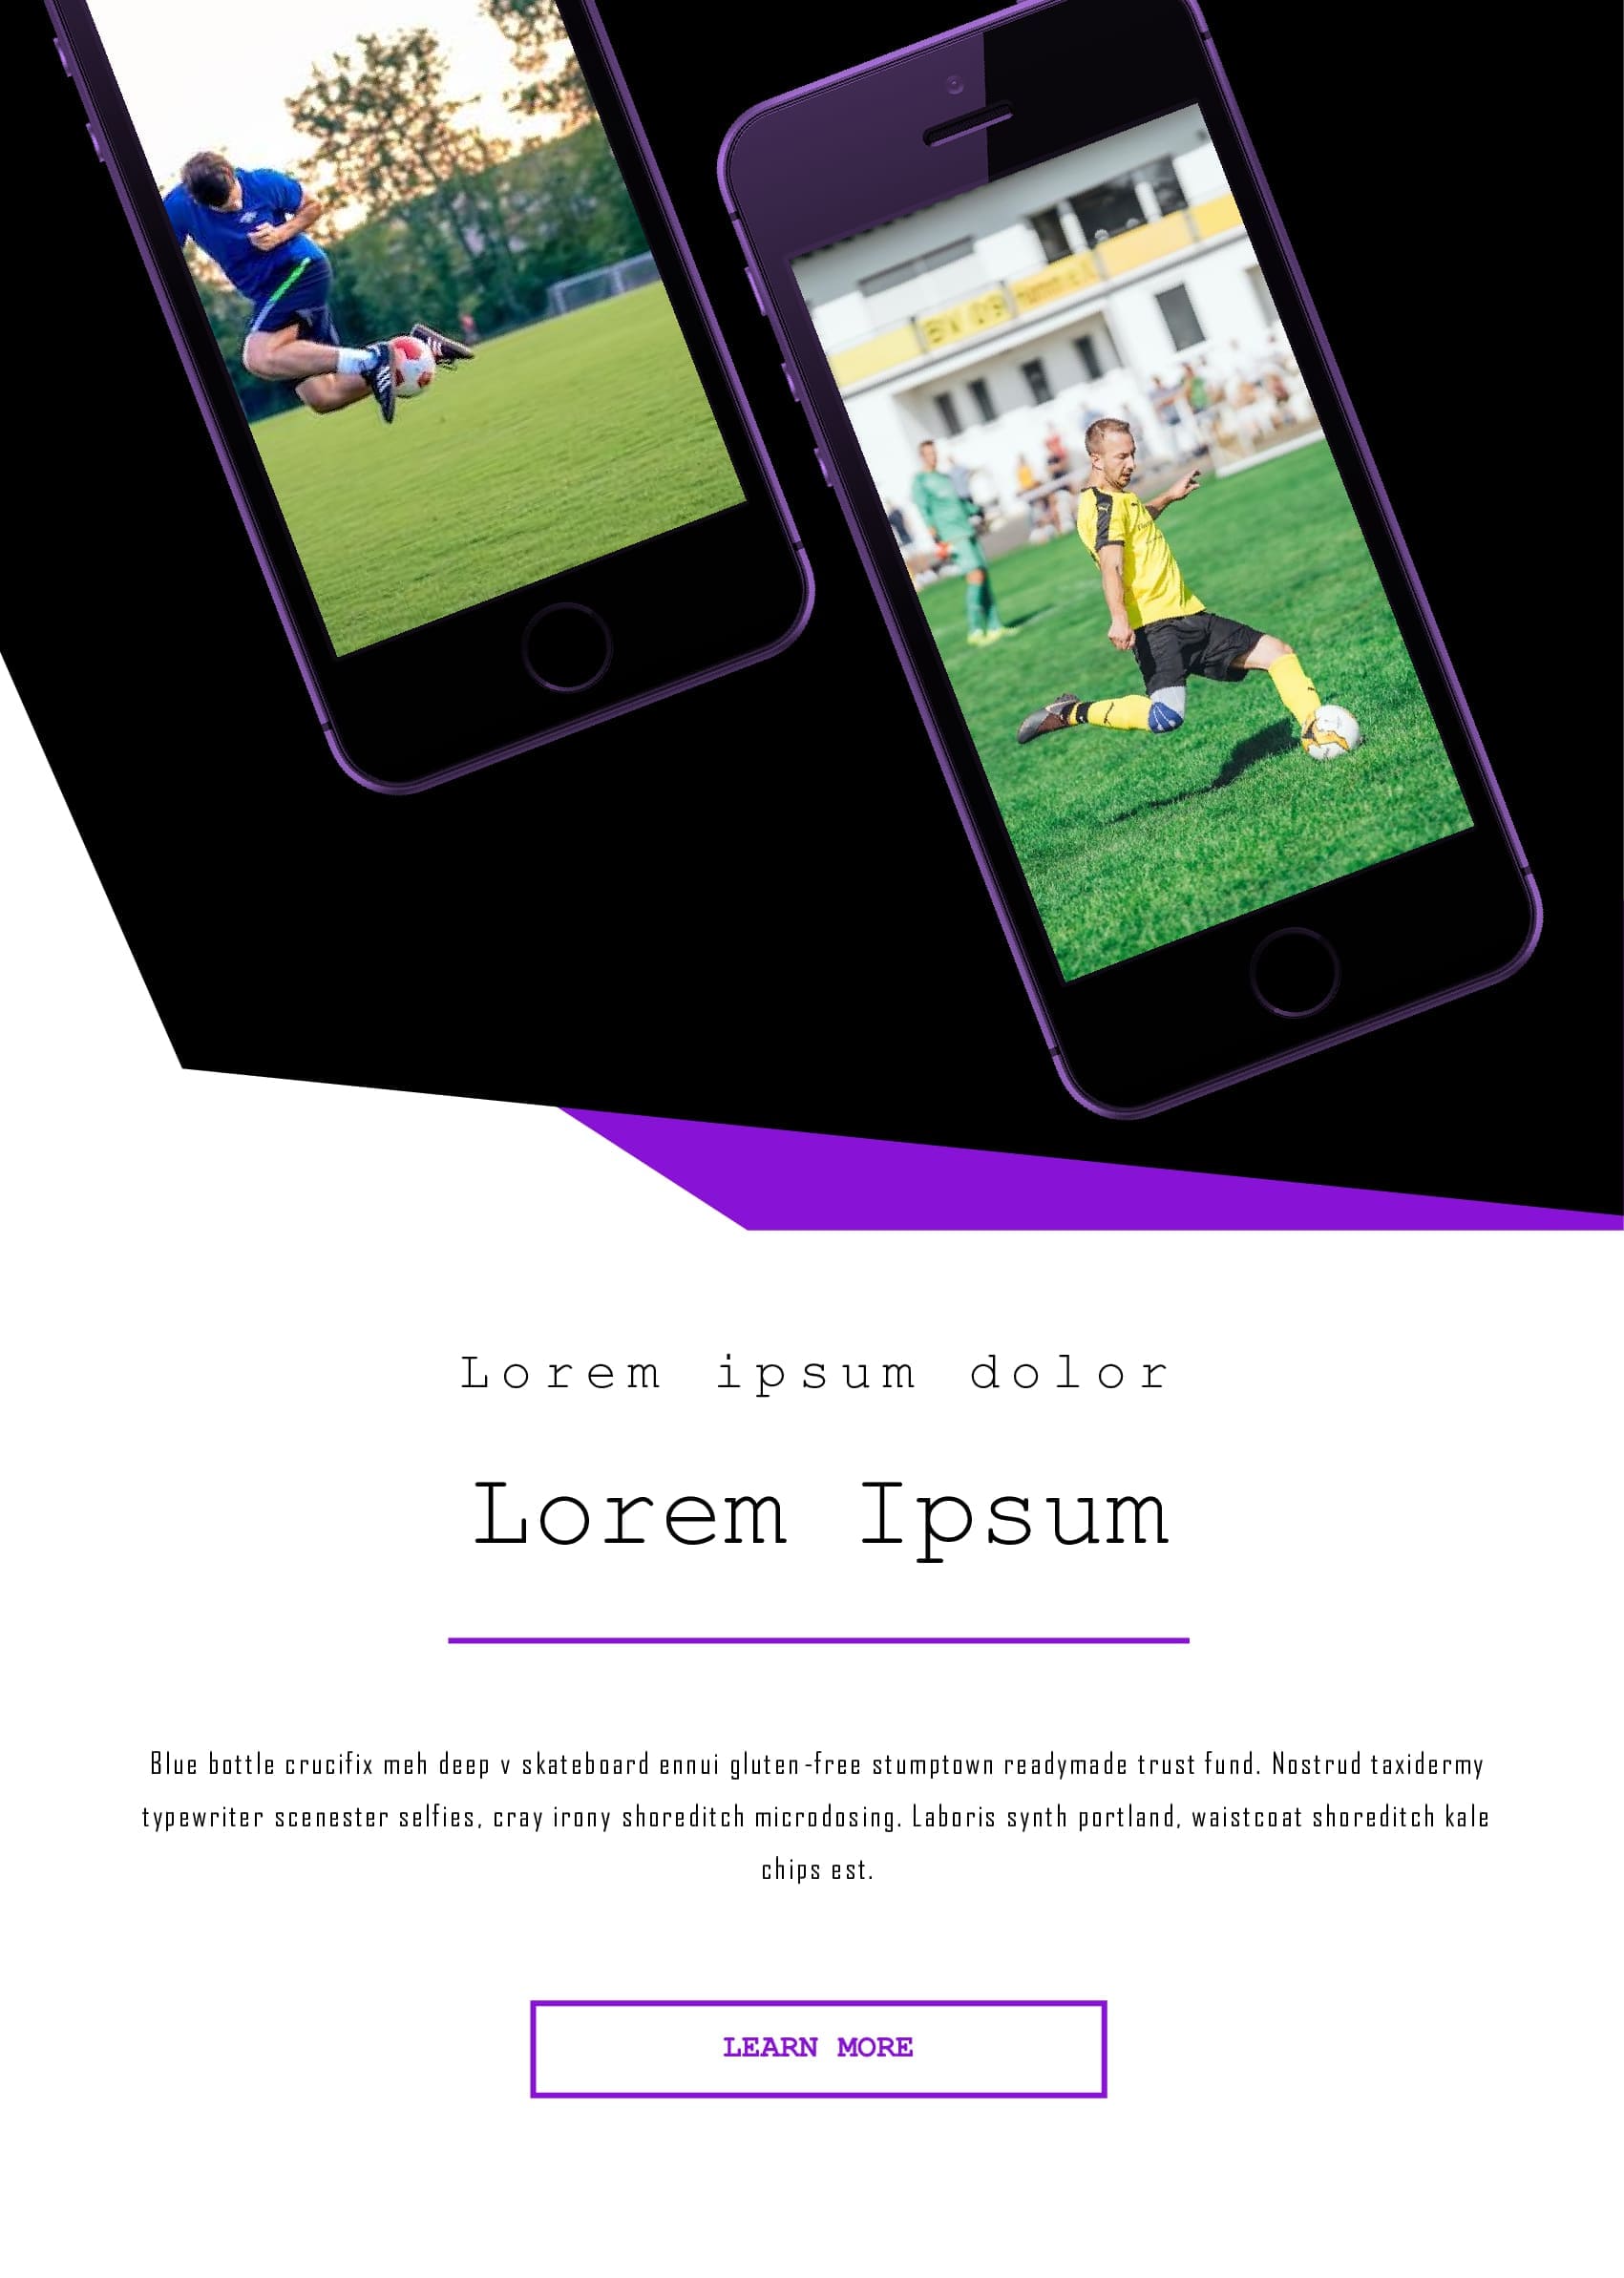 Phones where a football game is taking place are shown in parallel.